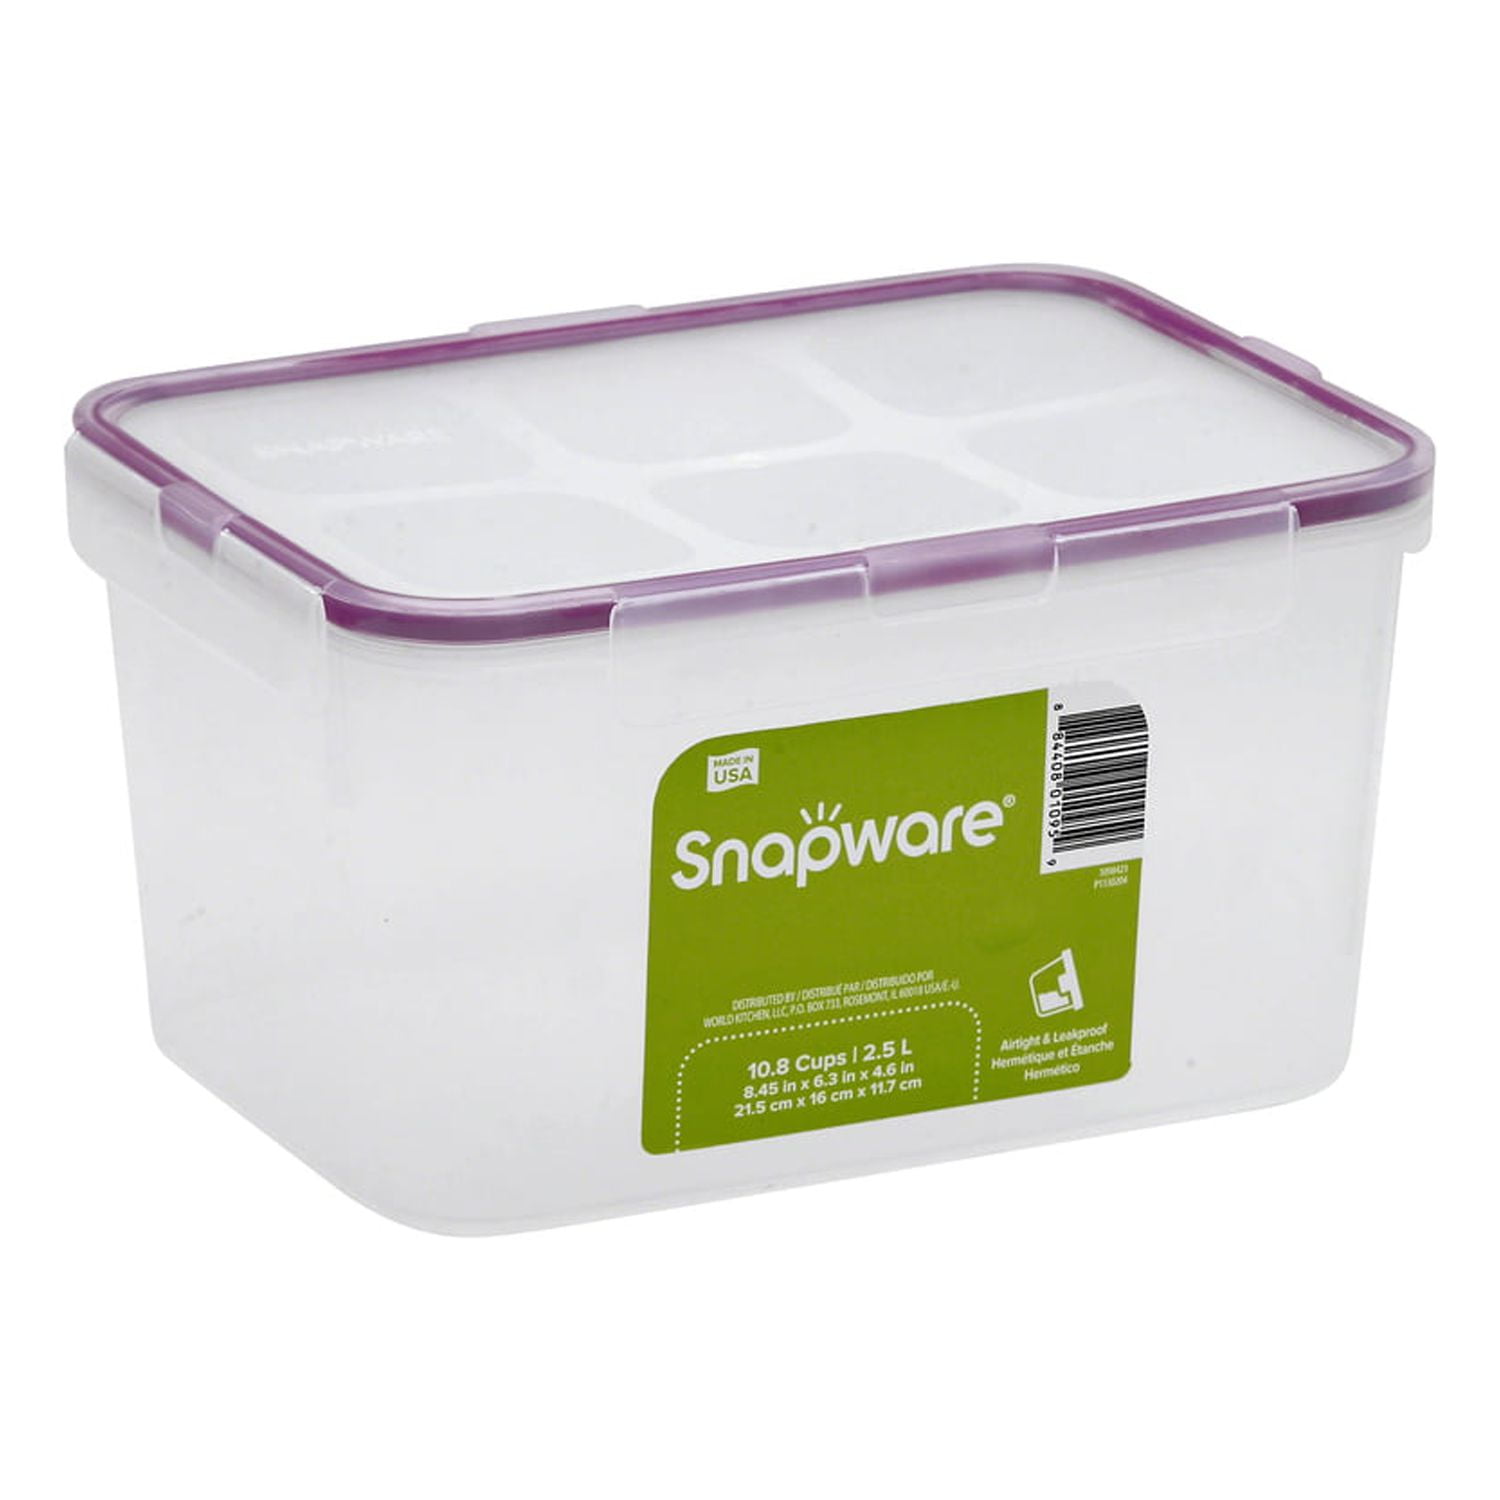 Rubbermaid 5 cup Clear Food Storage Container 1 pk -Pack of 1